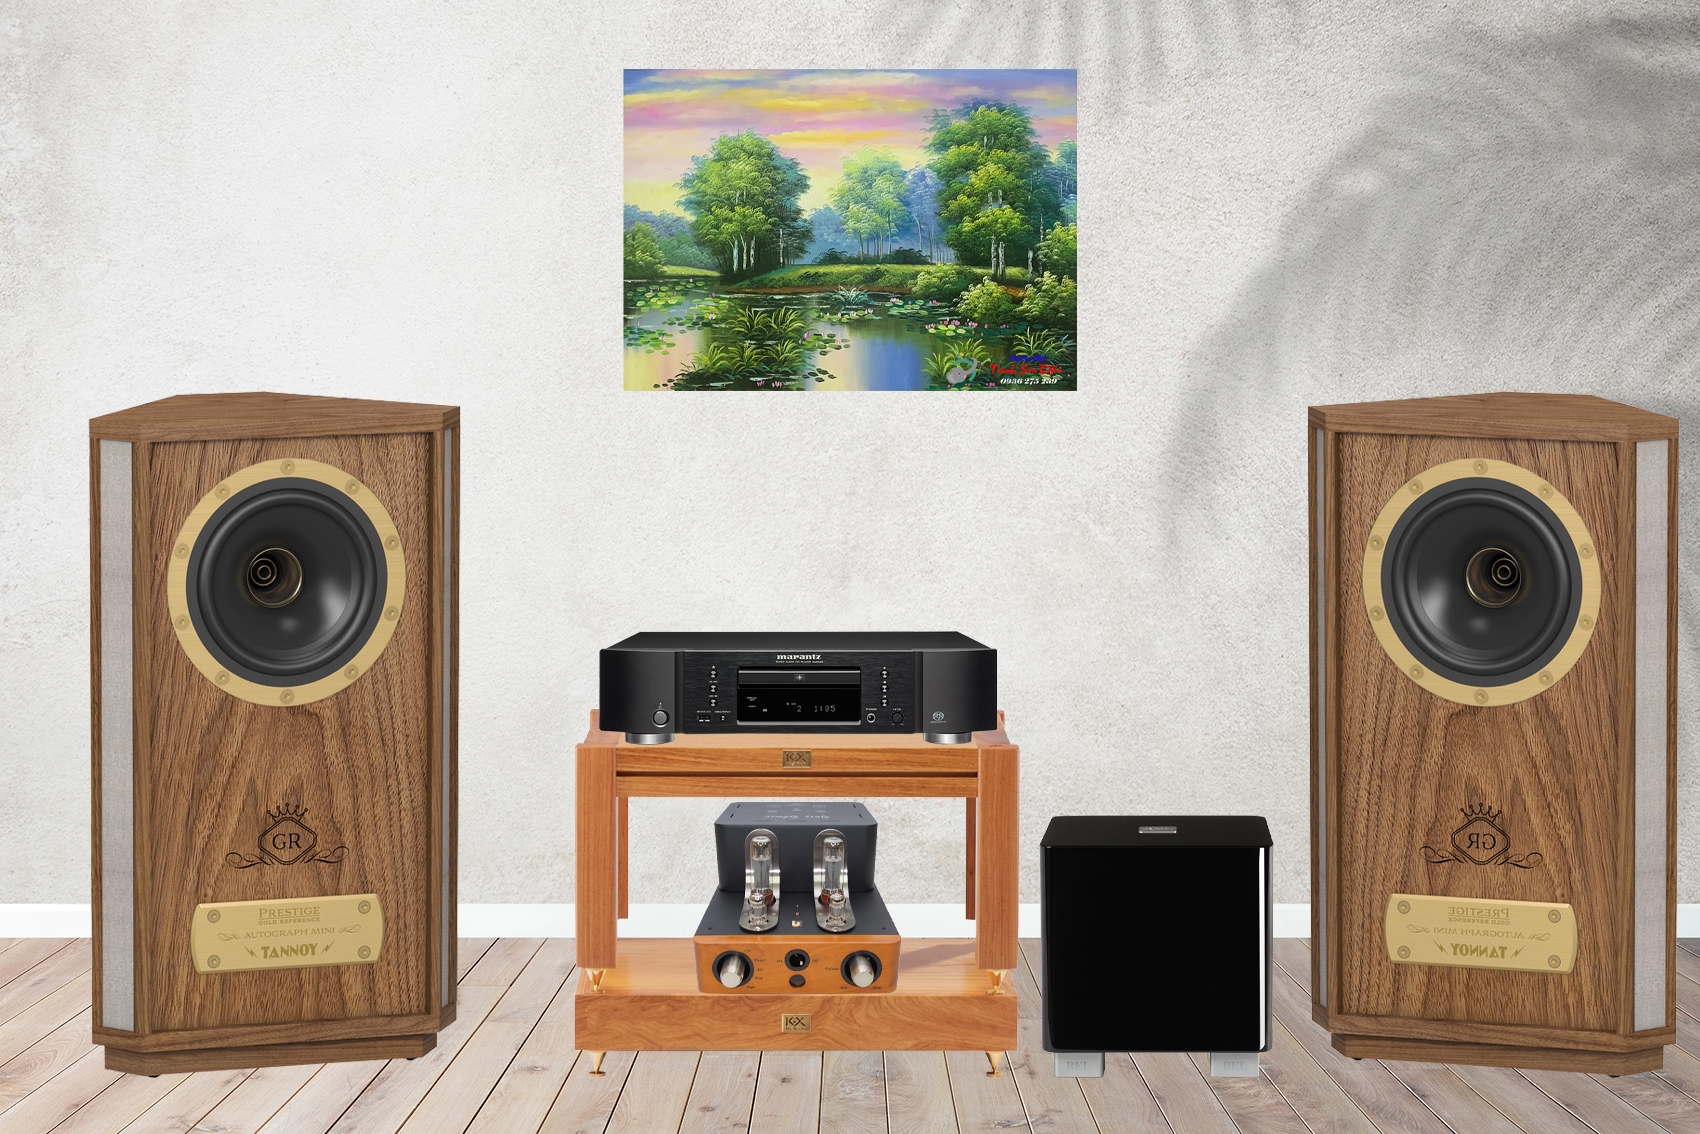 Hệ thống nghe nhạc Loa Tannoy Autograph Mini GR - Unison Research - REL 